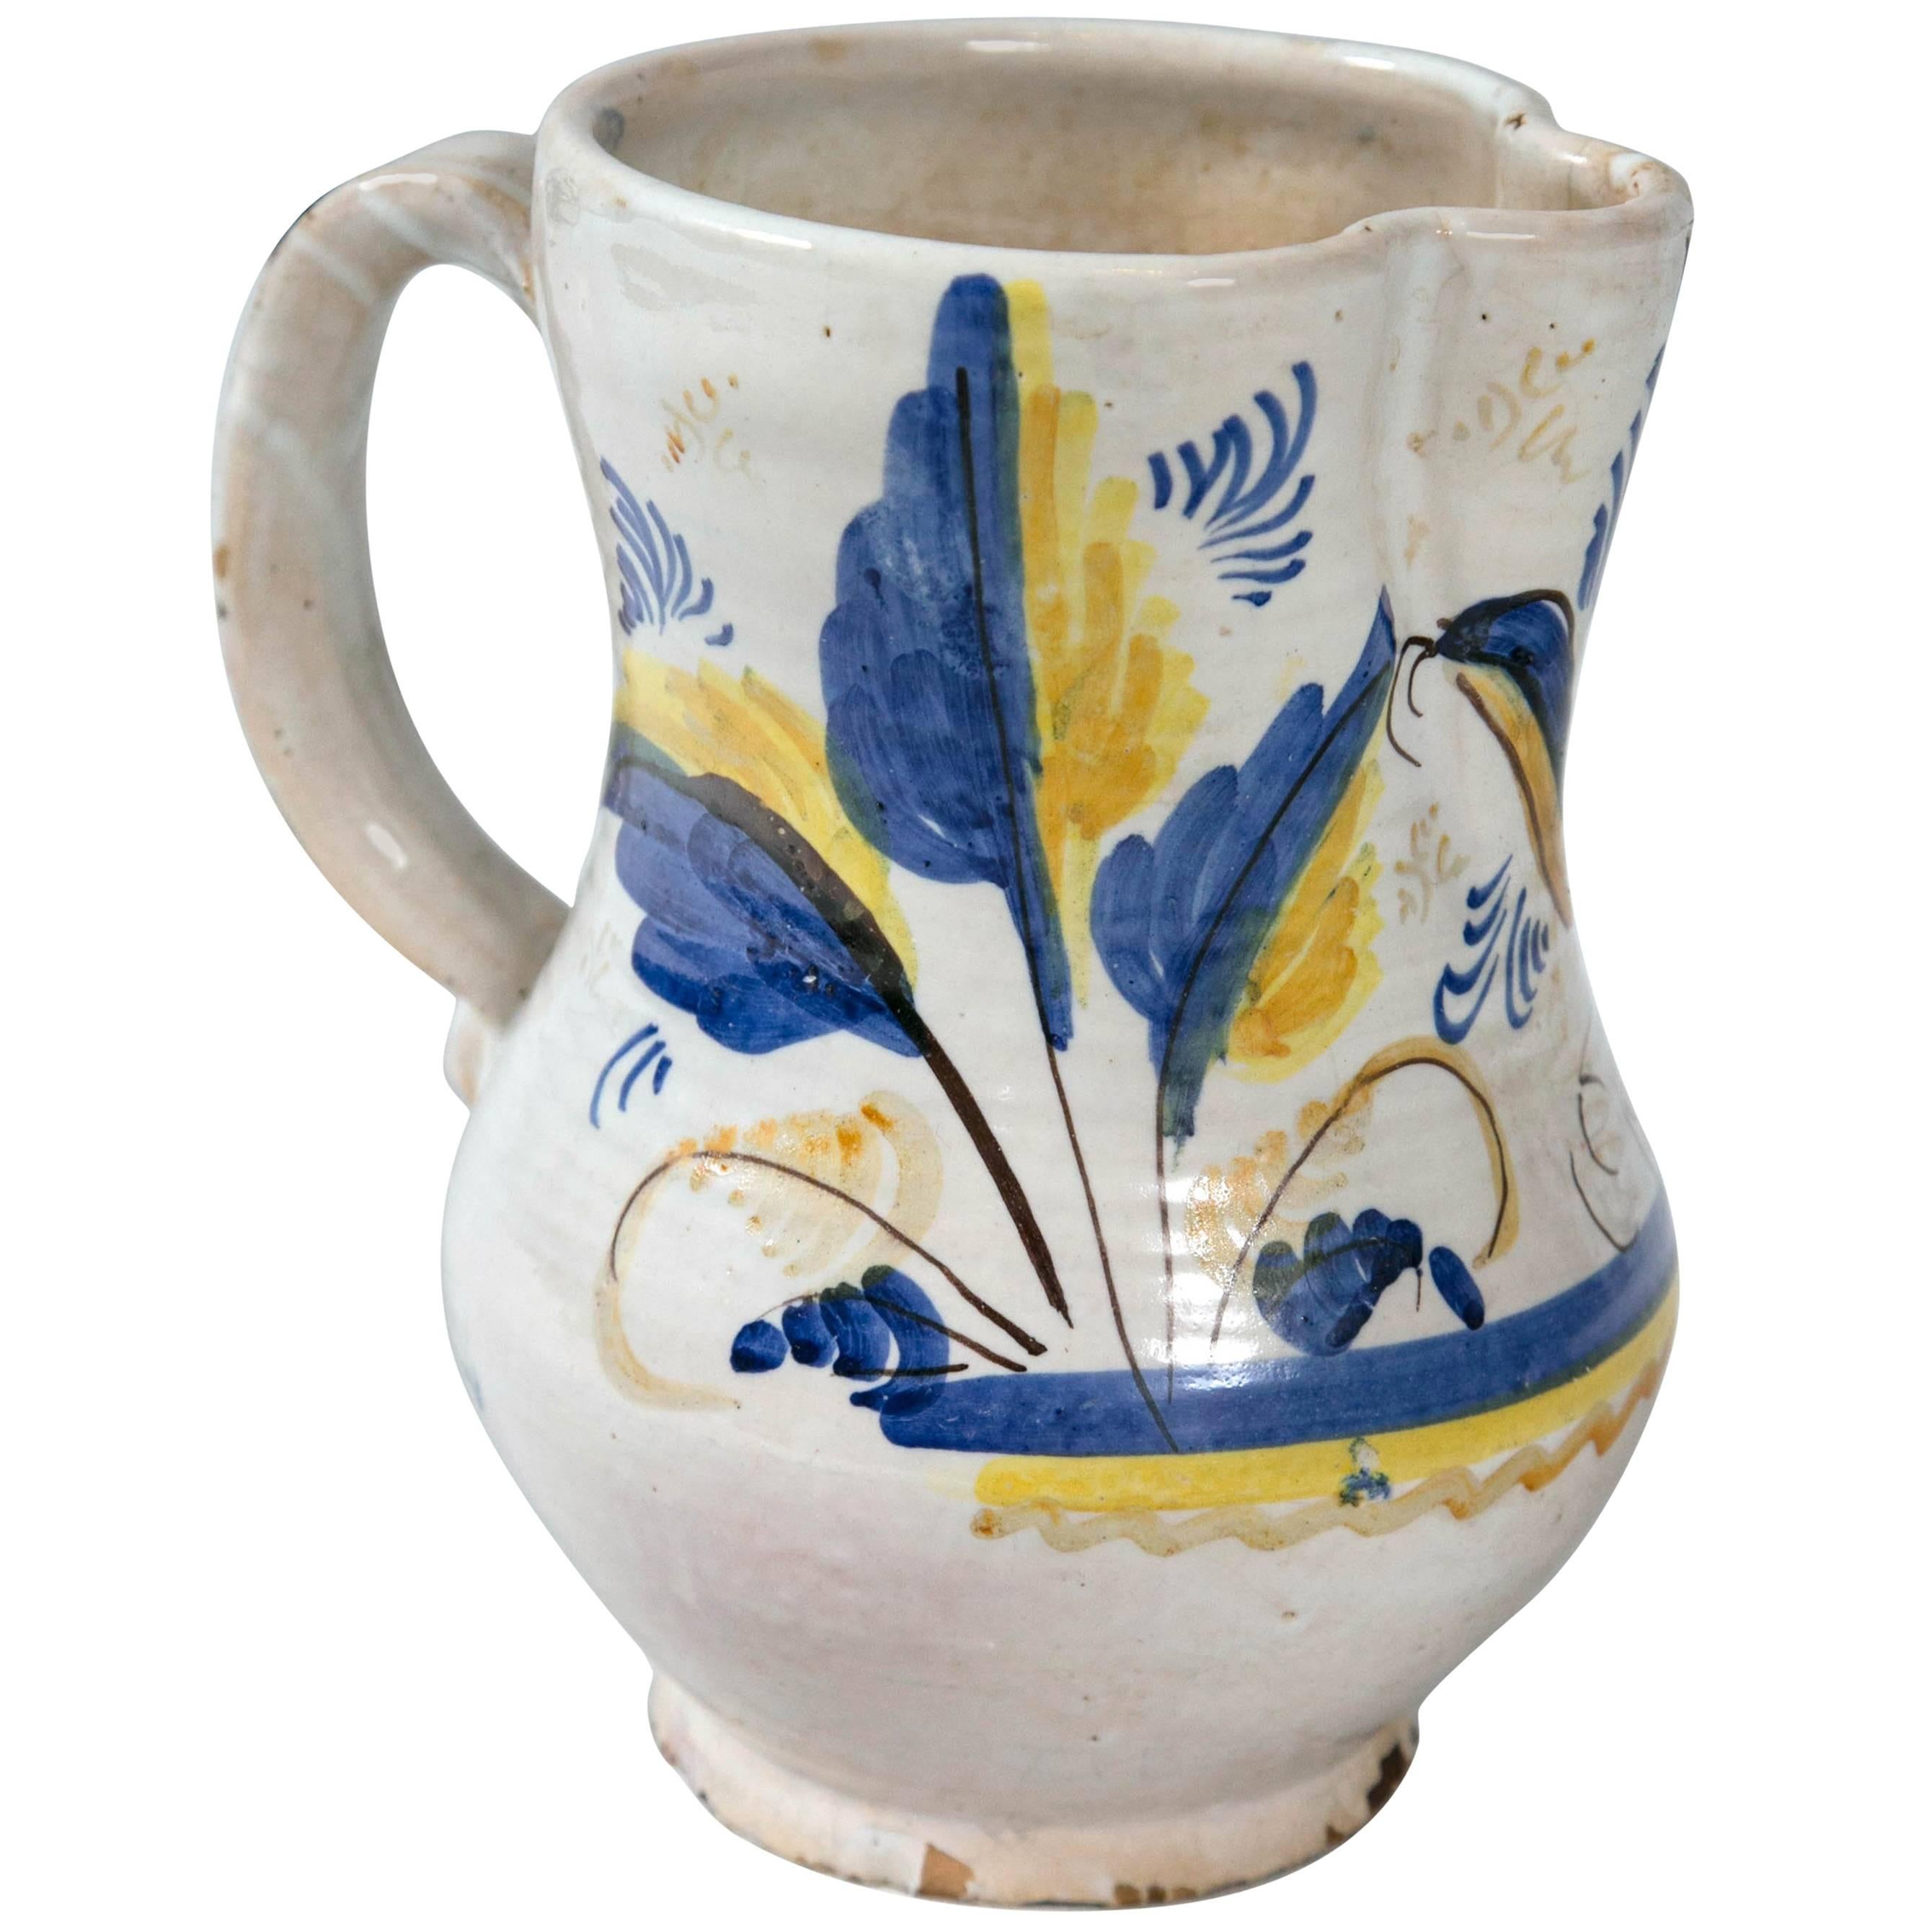 French Faience Pottery Pitcher, circa 1900